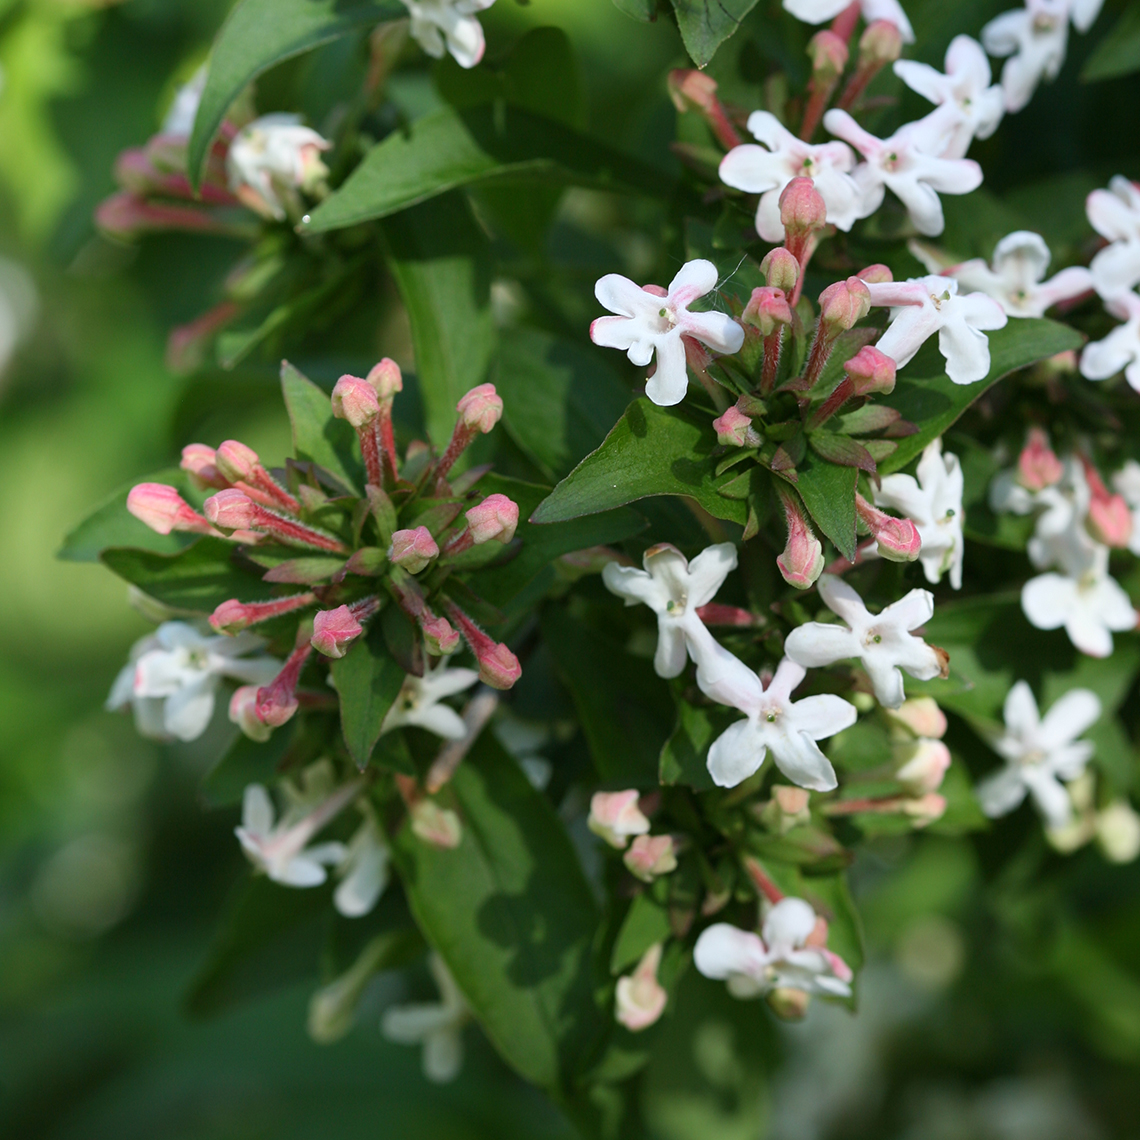 Close up of white and pink flowers of Sweet Emotion Abelia